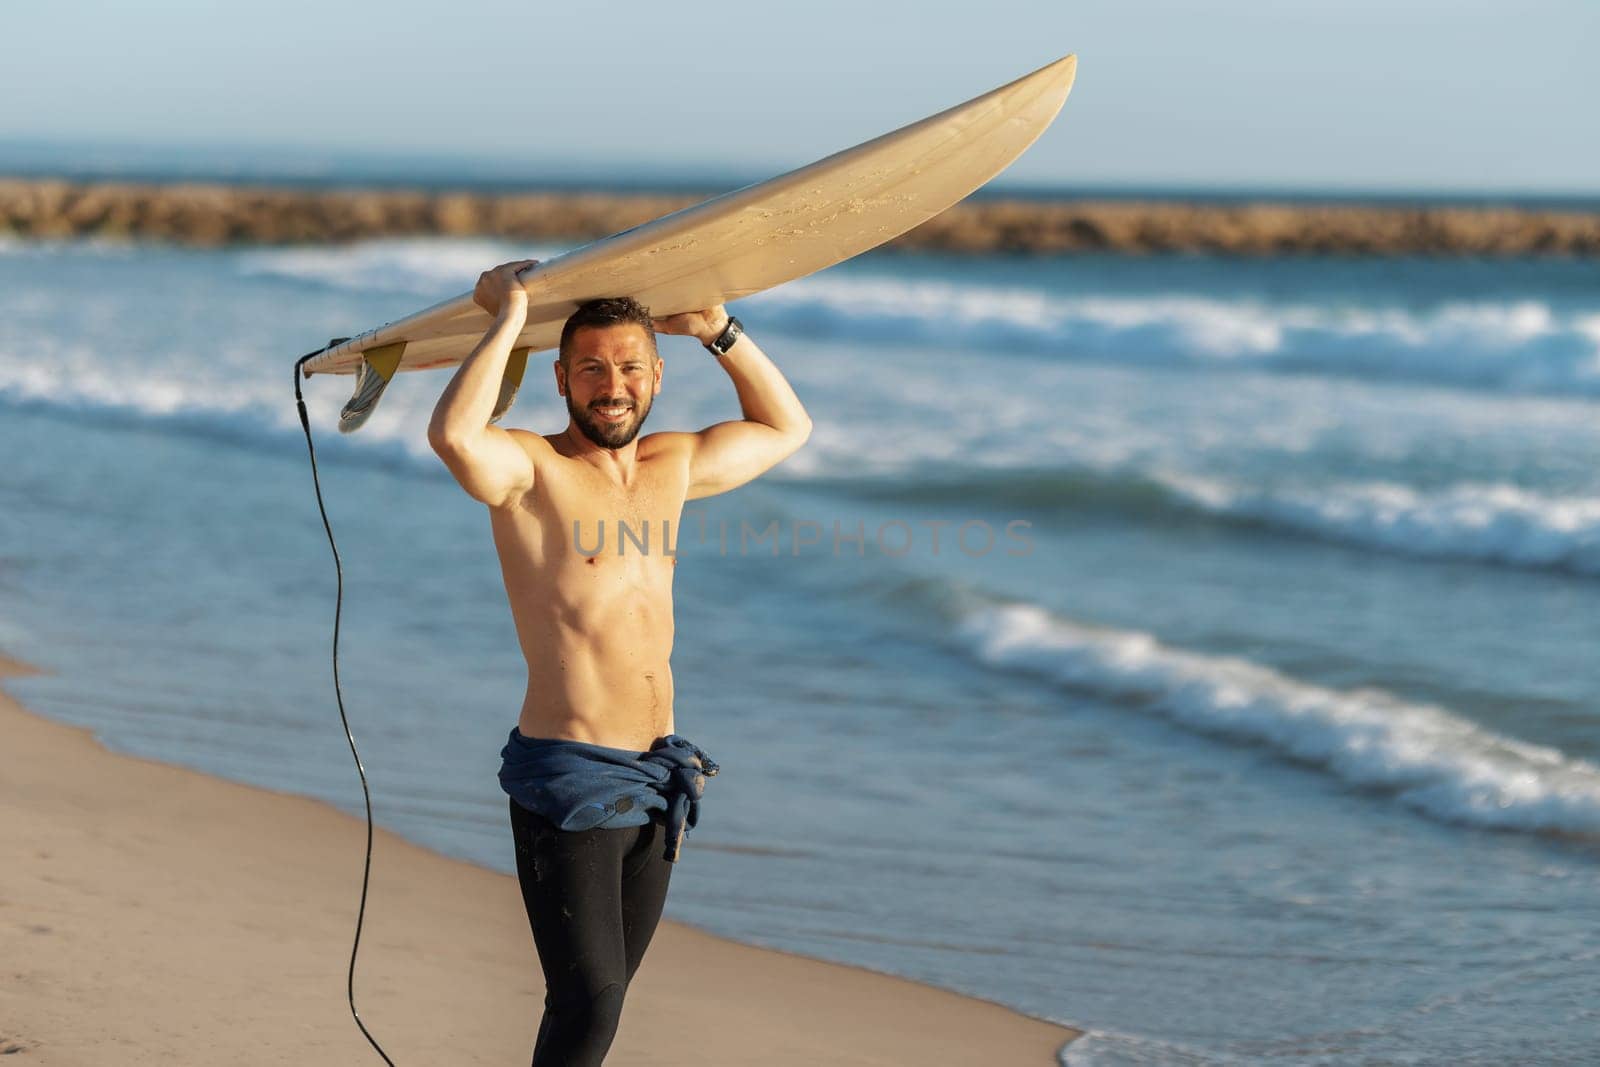 A smiling man surfer with naked torso holding a surfing board over his head. Mid shot